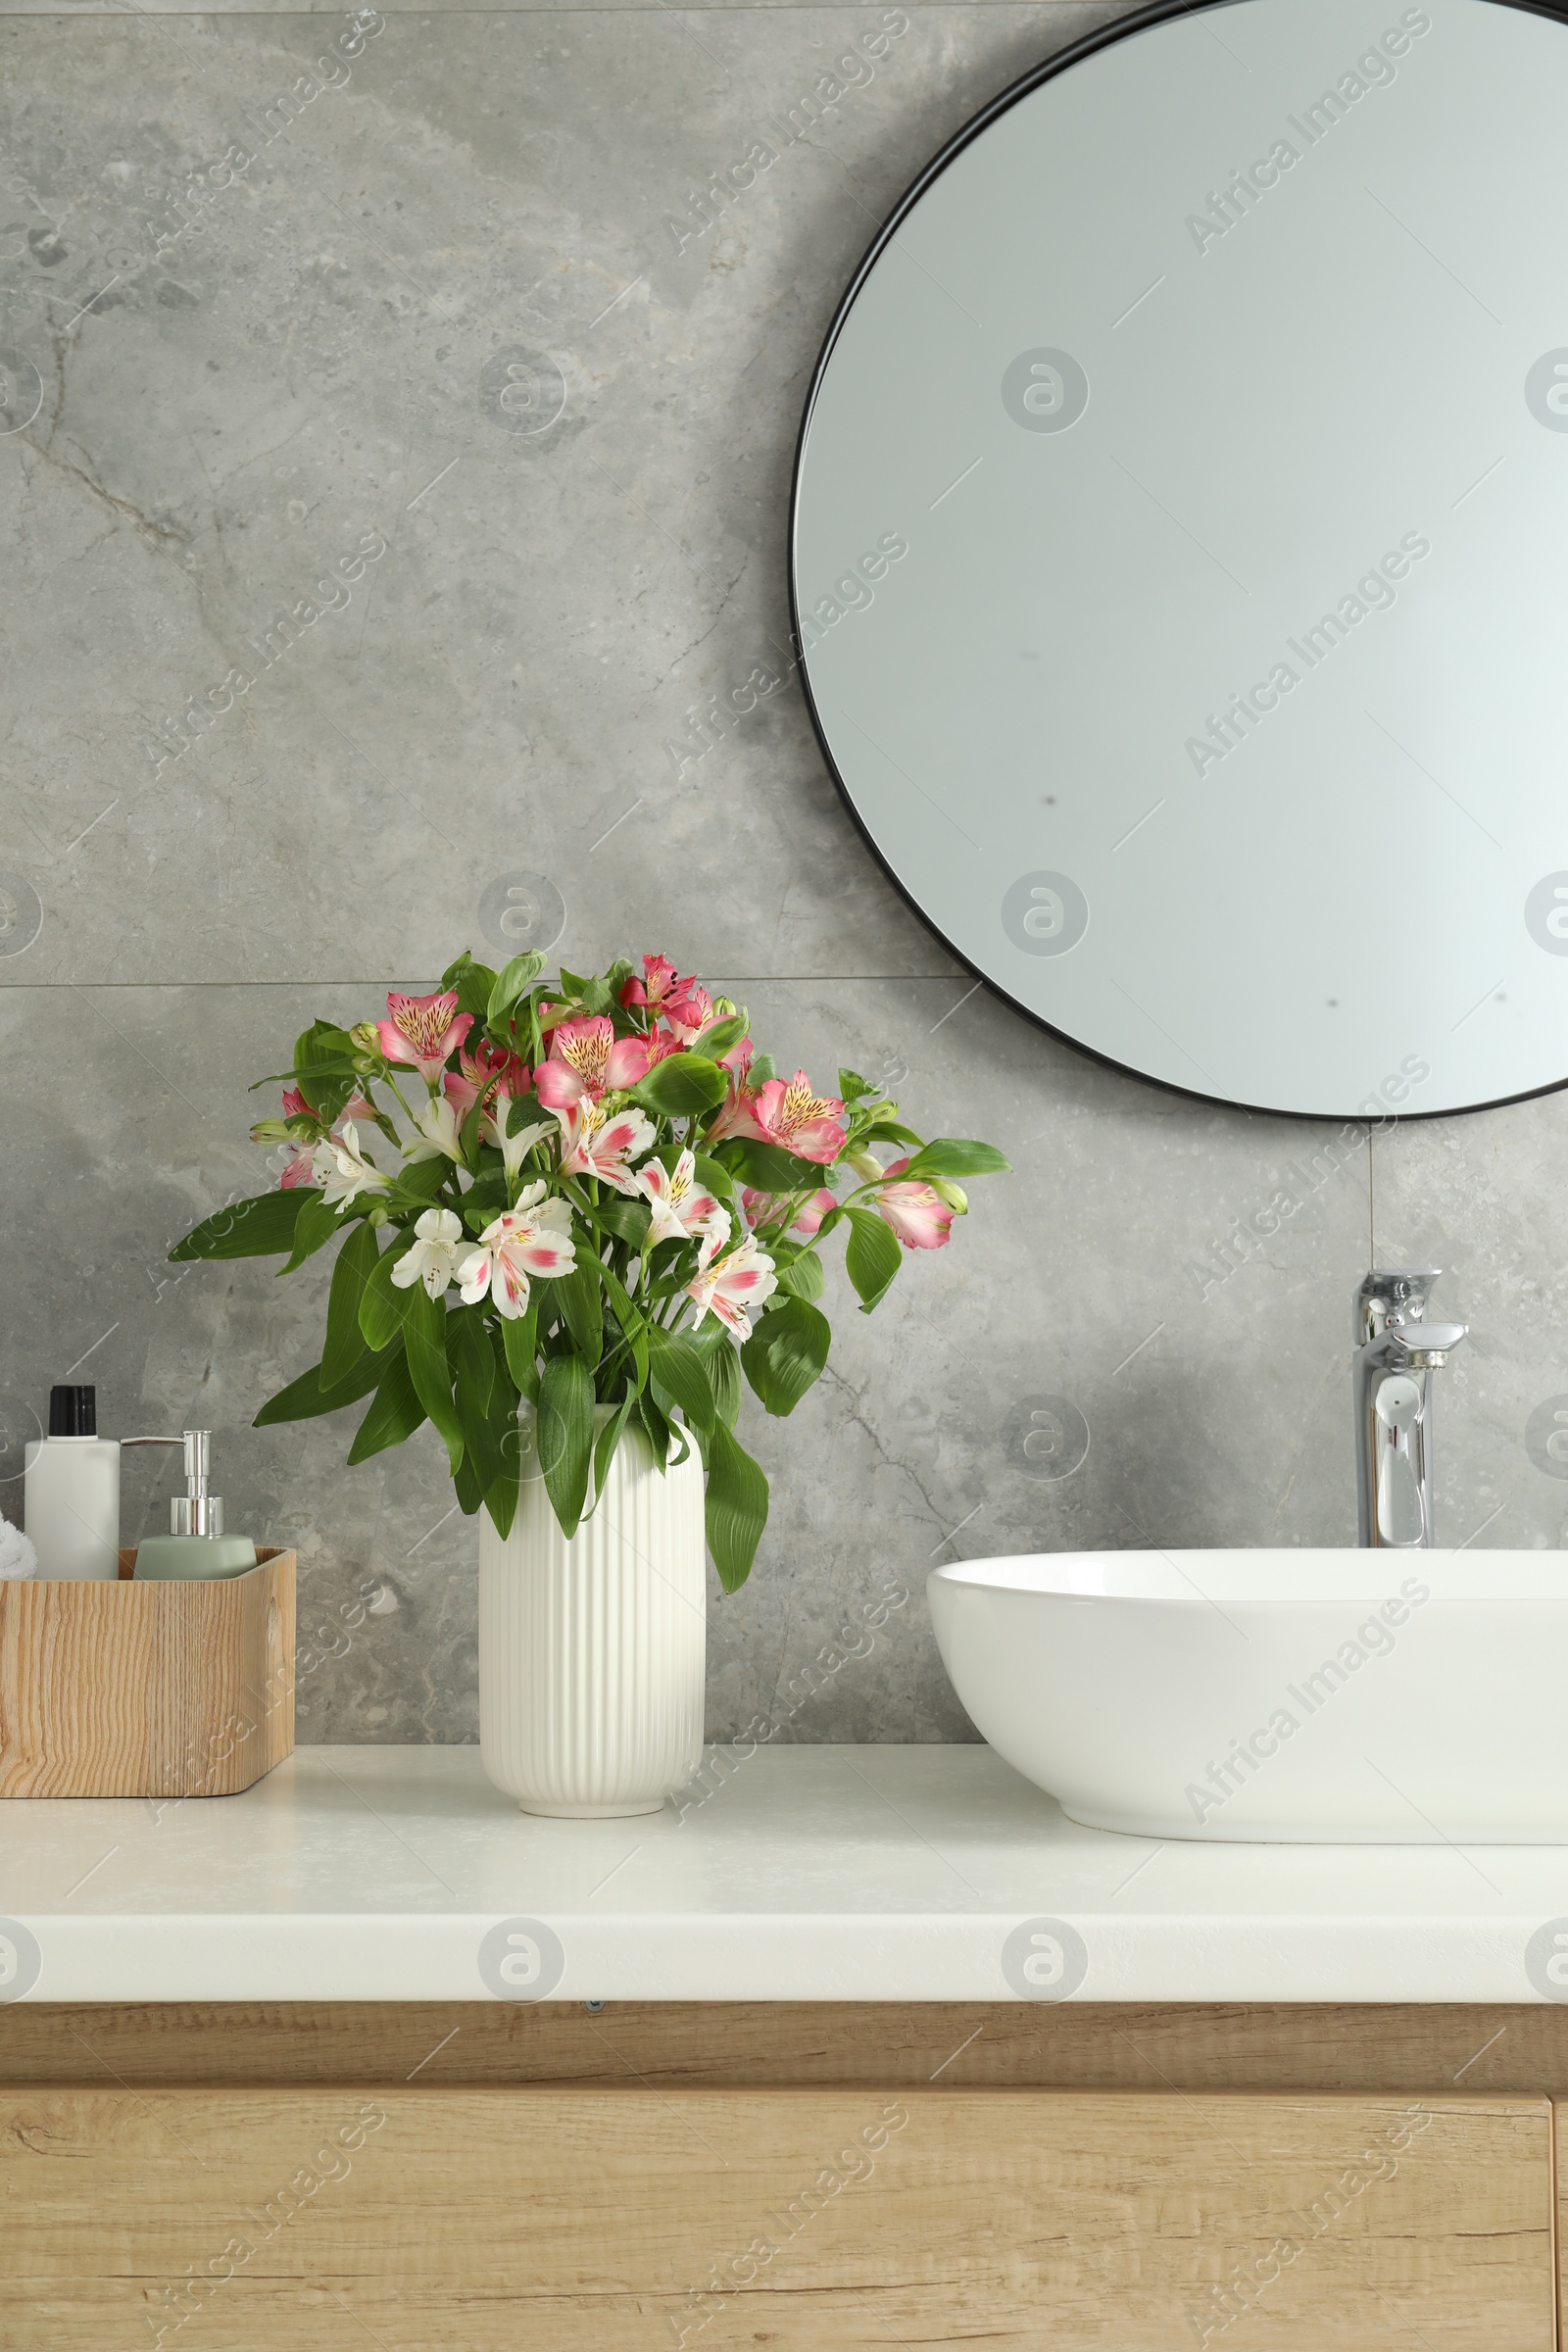 Photo of Vase with beautiful Alstroemeria flowers and toiletries near sink in bathroom